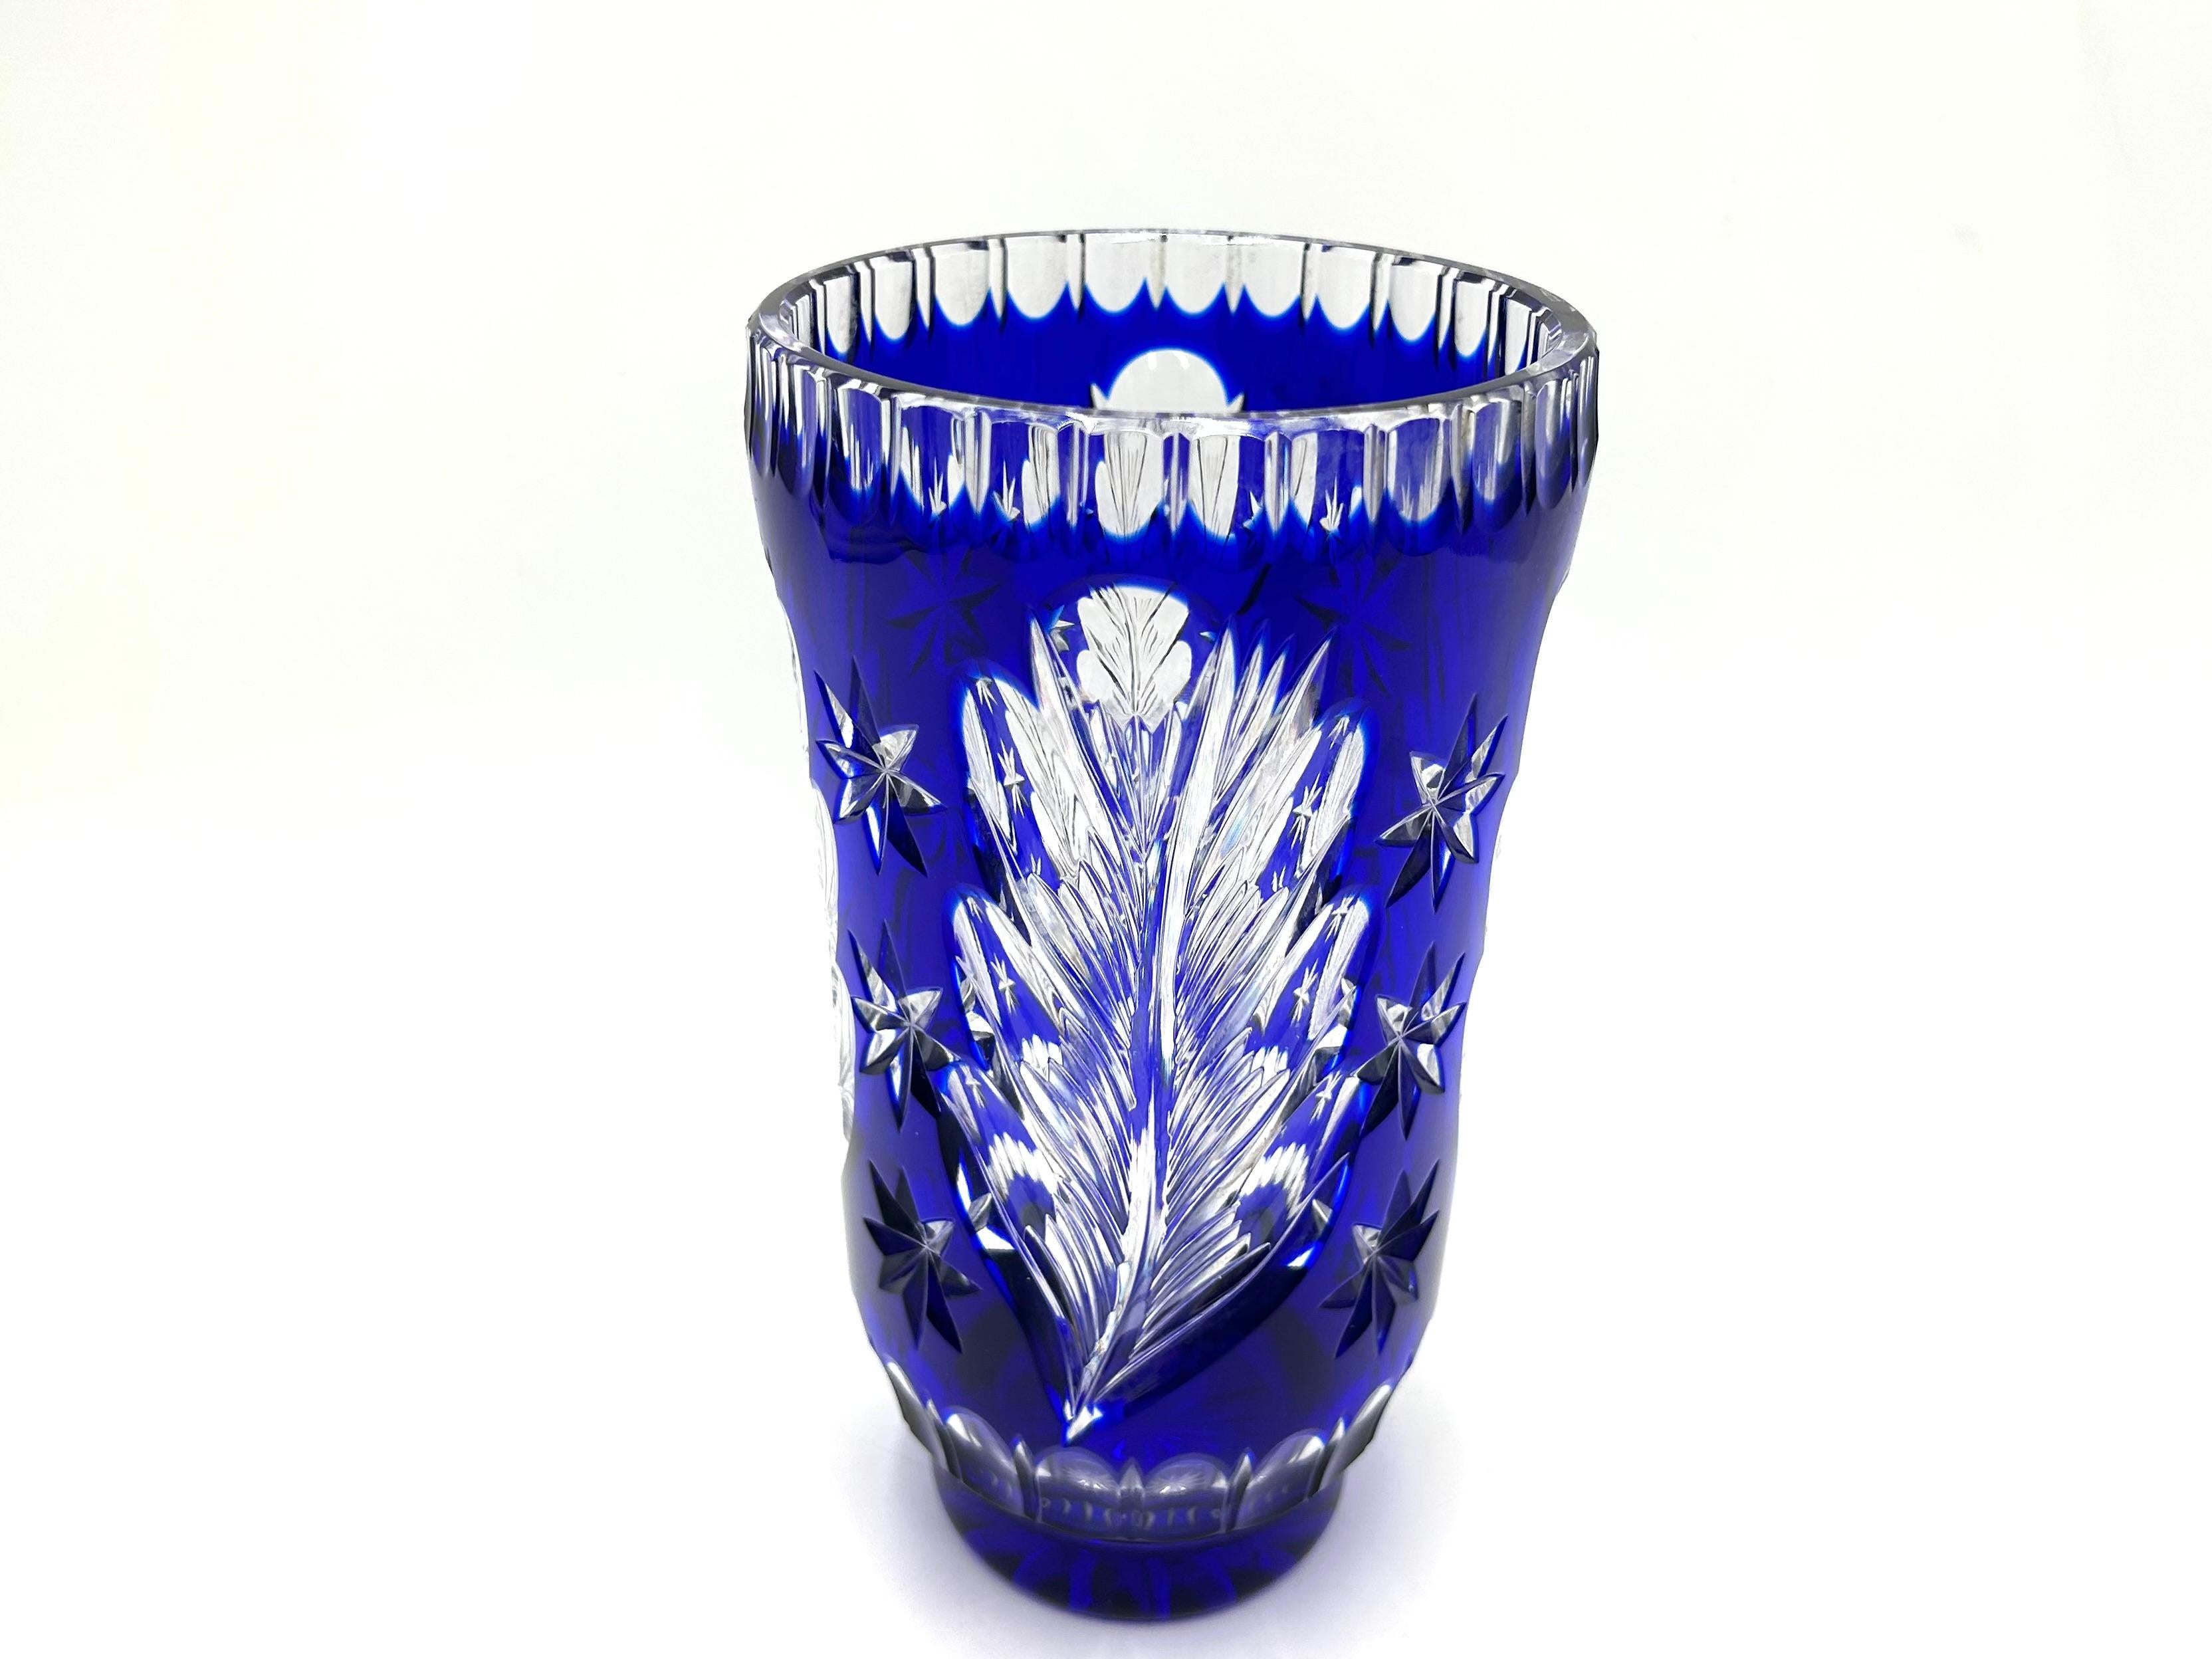 Cobalt crystal vase with beautiful motifs of oak leaves and stars

Made in Poland in the 1960s.

Very good condition, no damage

height 20.5 cm, diameter 11 cm